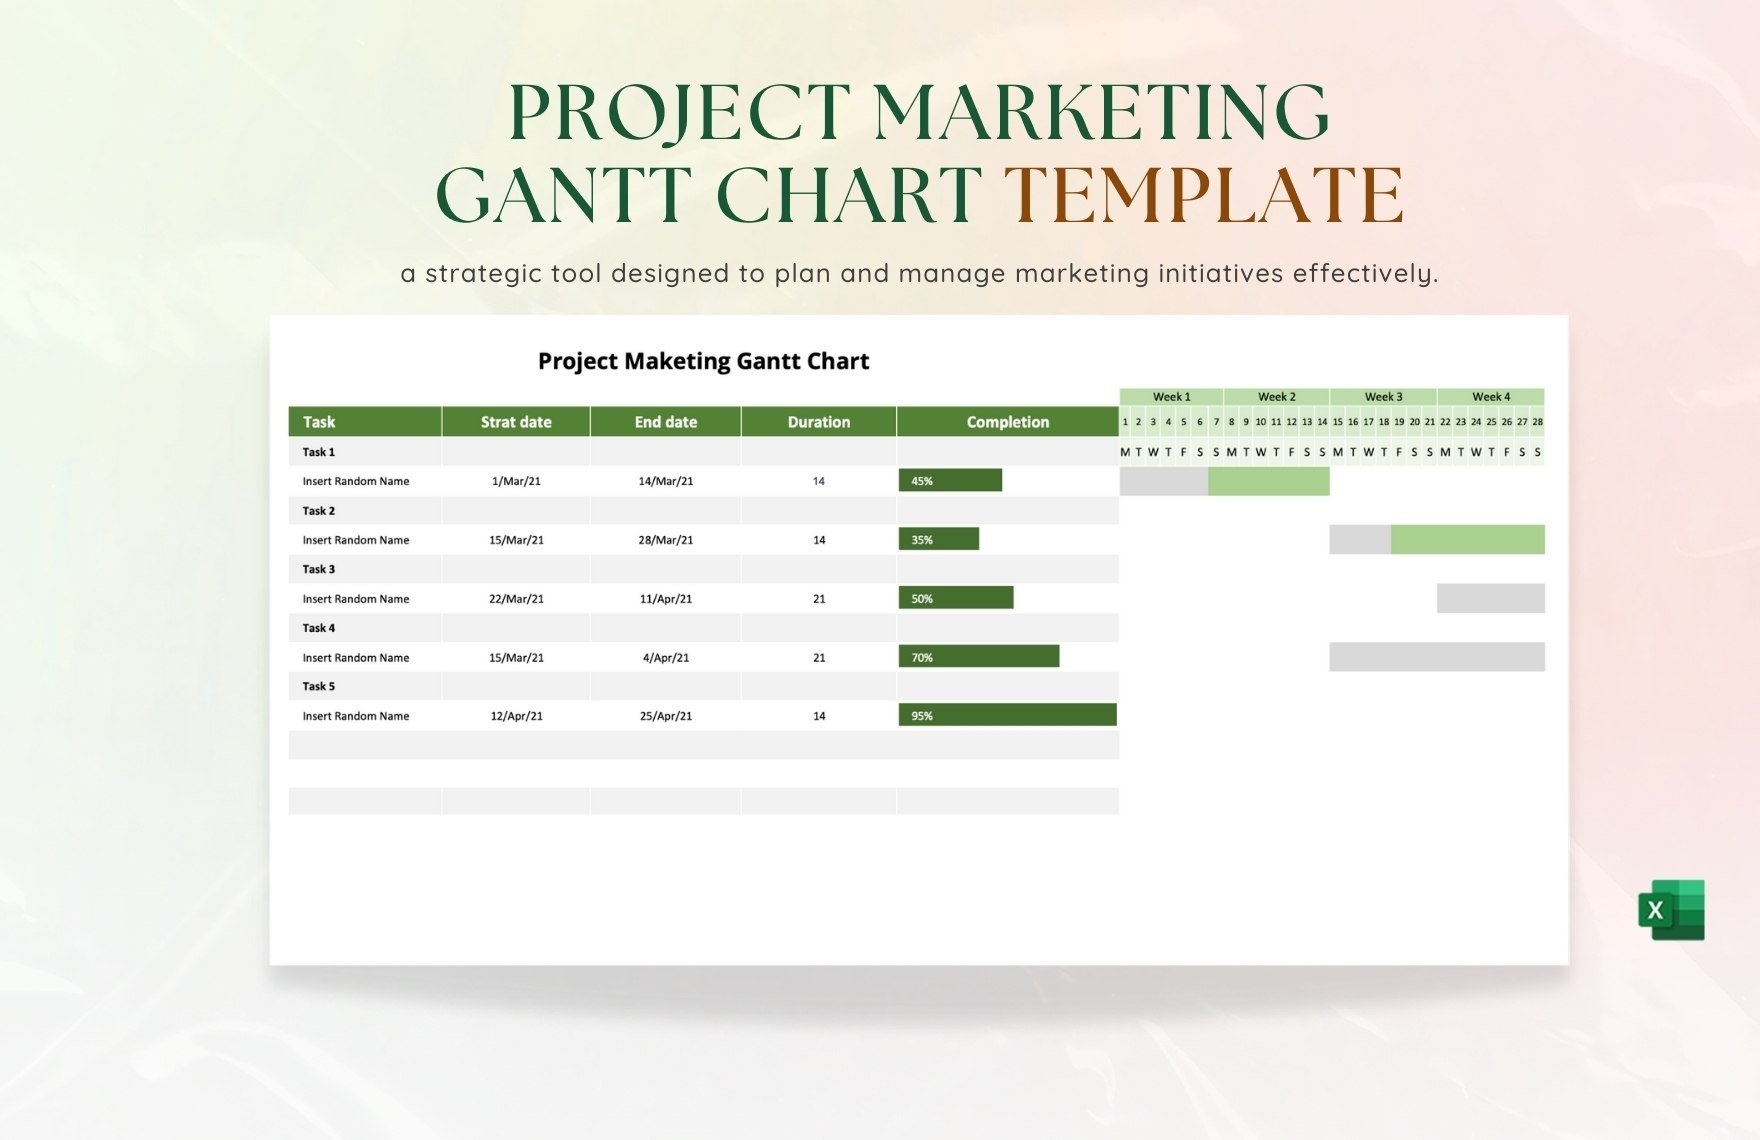 Project Marketing Gantt Chart Template in Excel